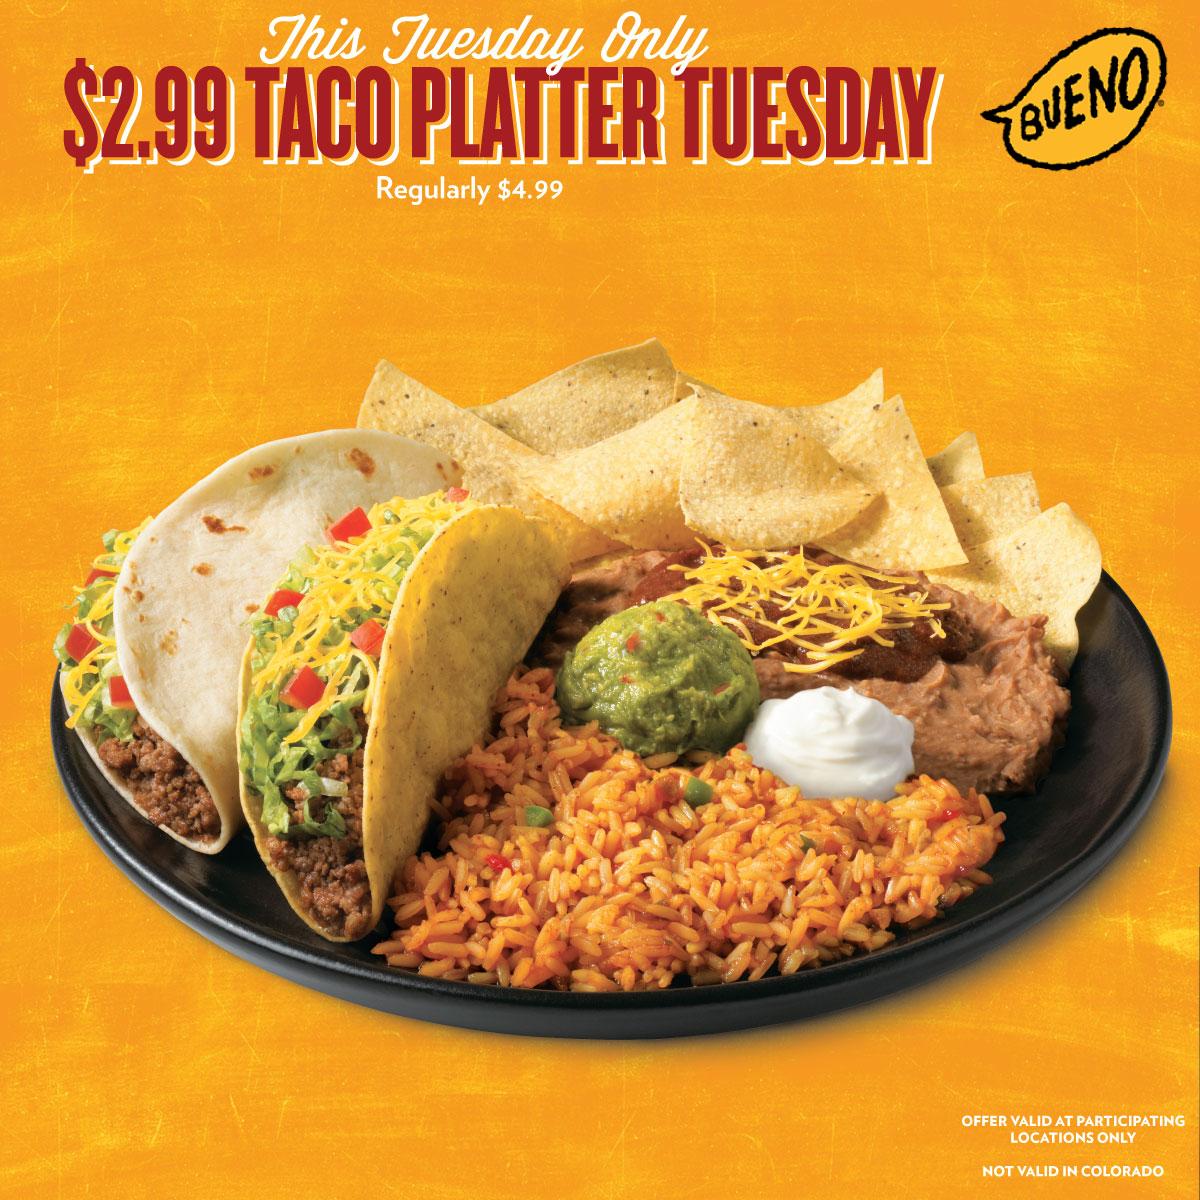 Taco Bueno On Twitter 2 99 Platter Tuesday Today Only Tacobueno Because Youdeservebueno Http T Co Pbwqeu74mg